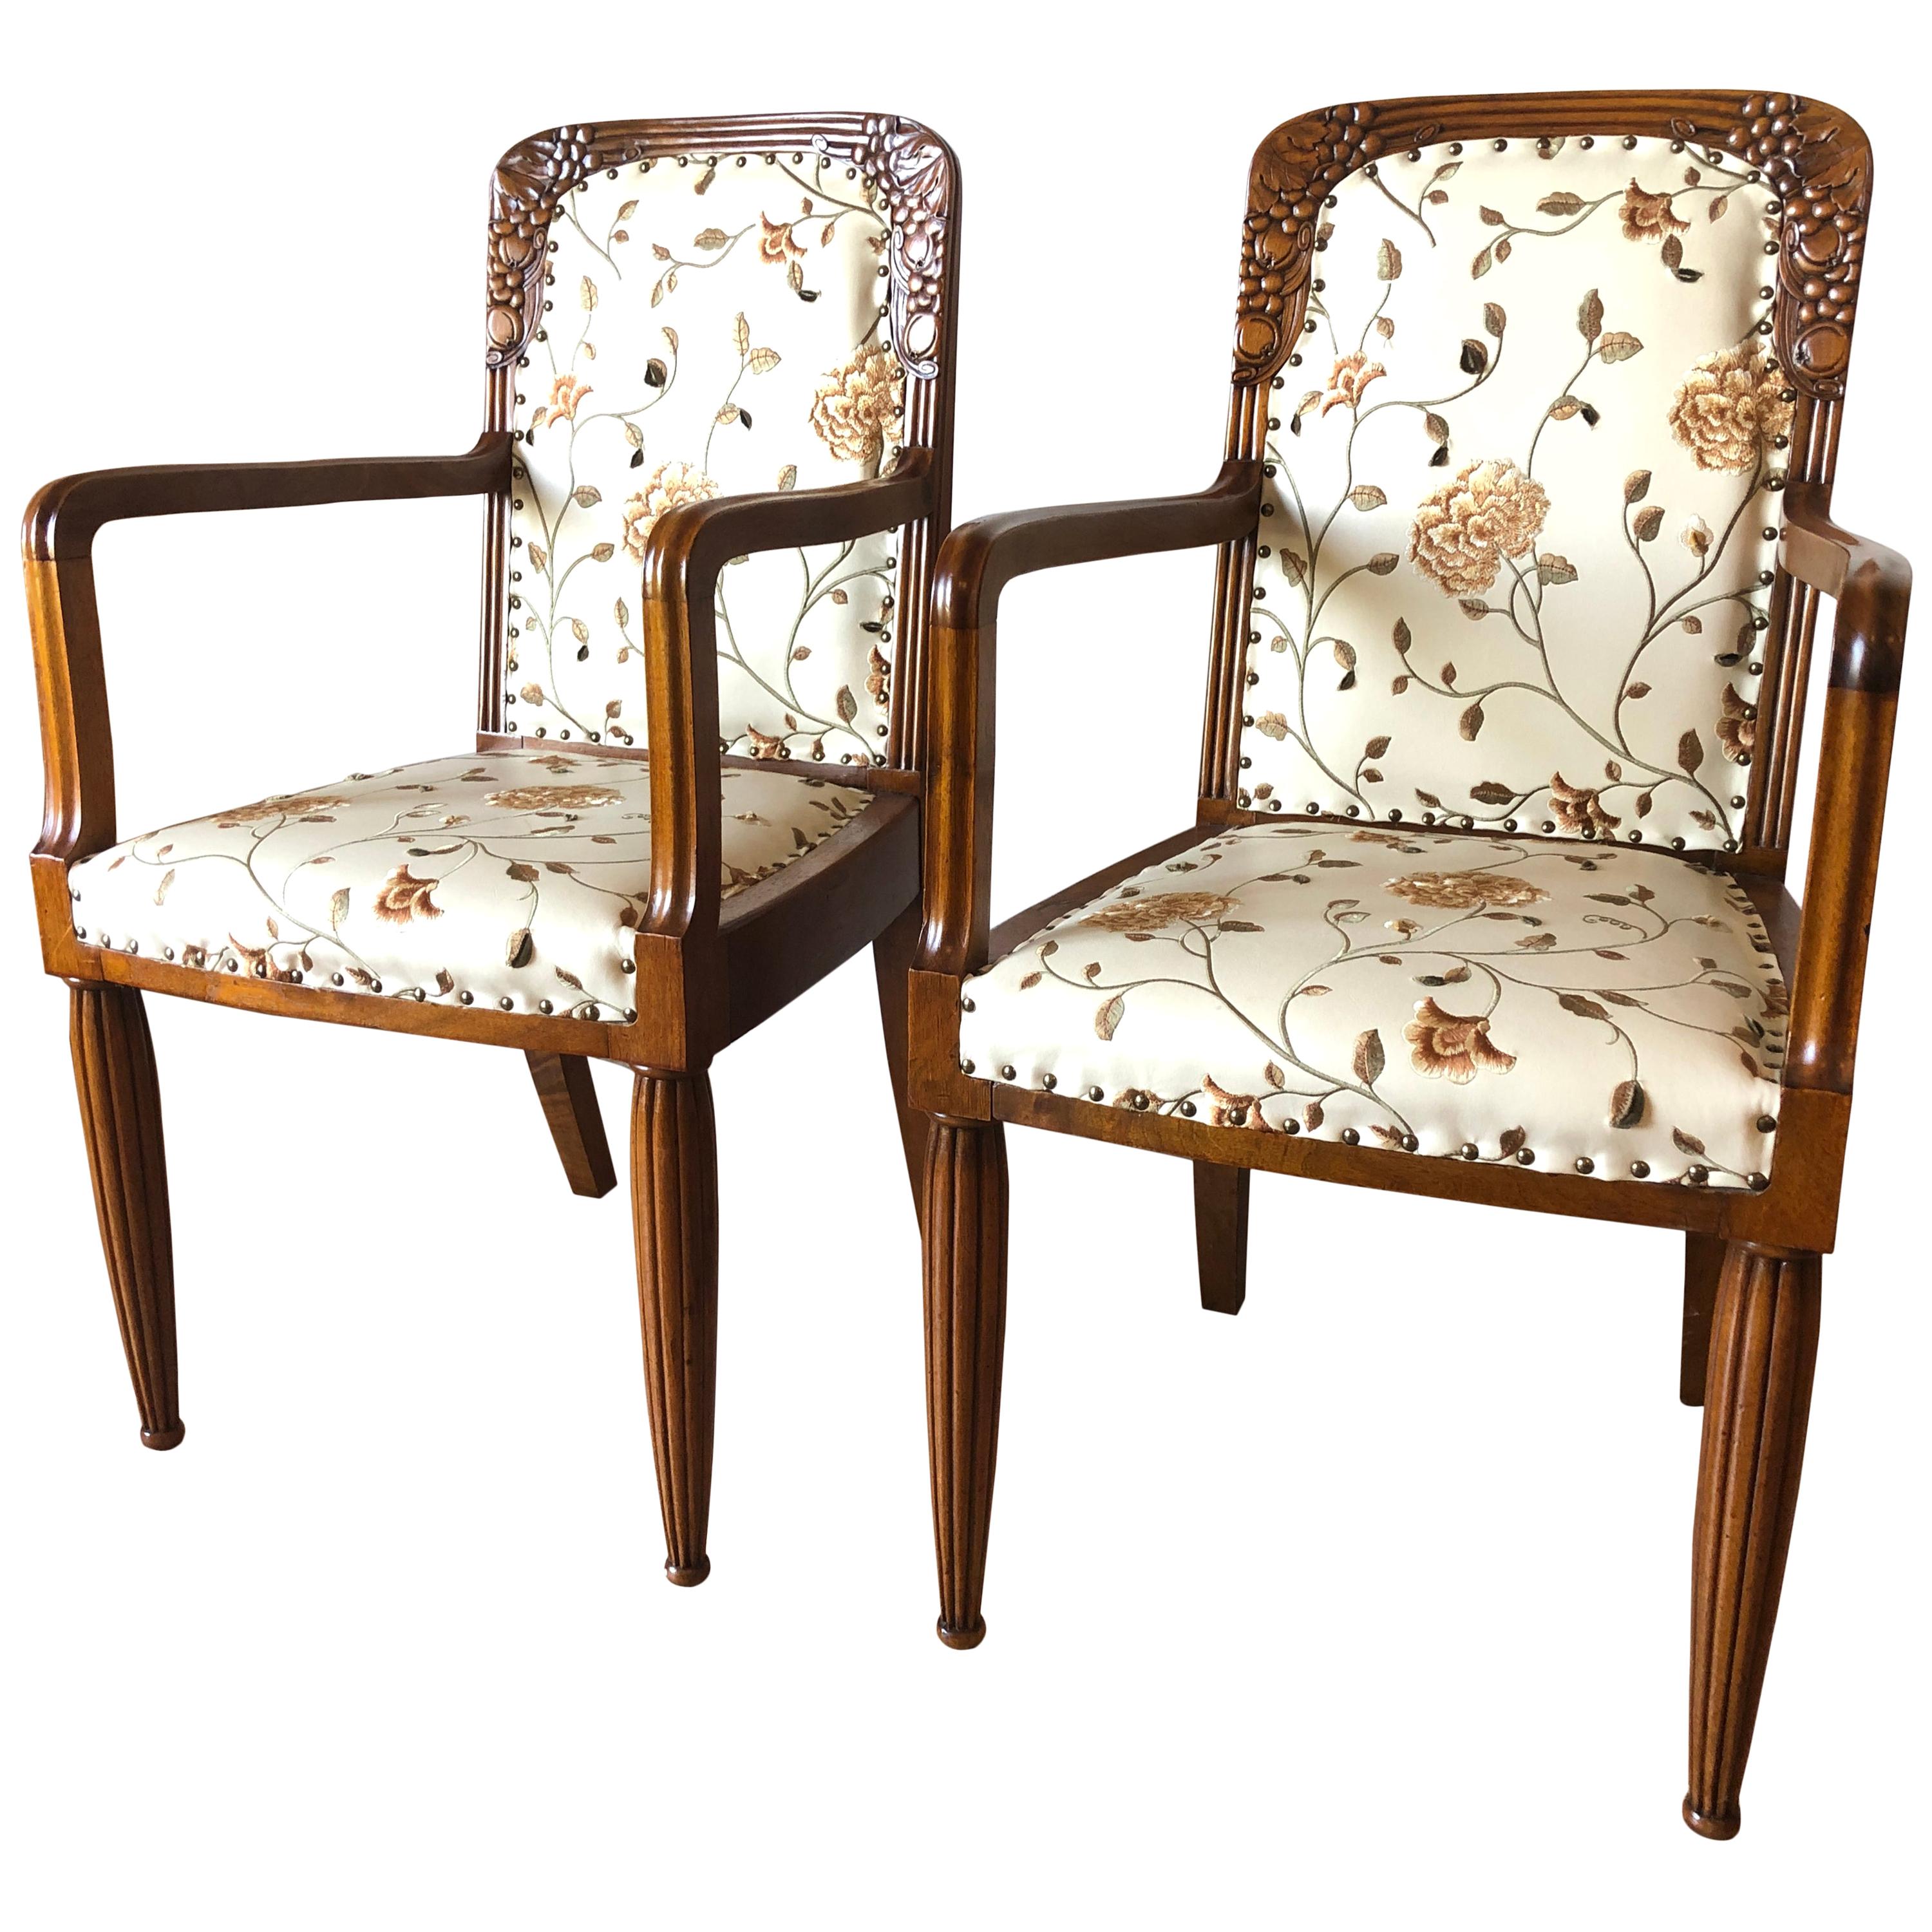 Pair of French Liberty Art Nouveau Armchairs, 1920s